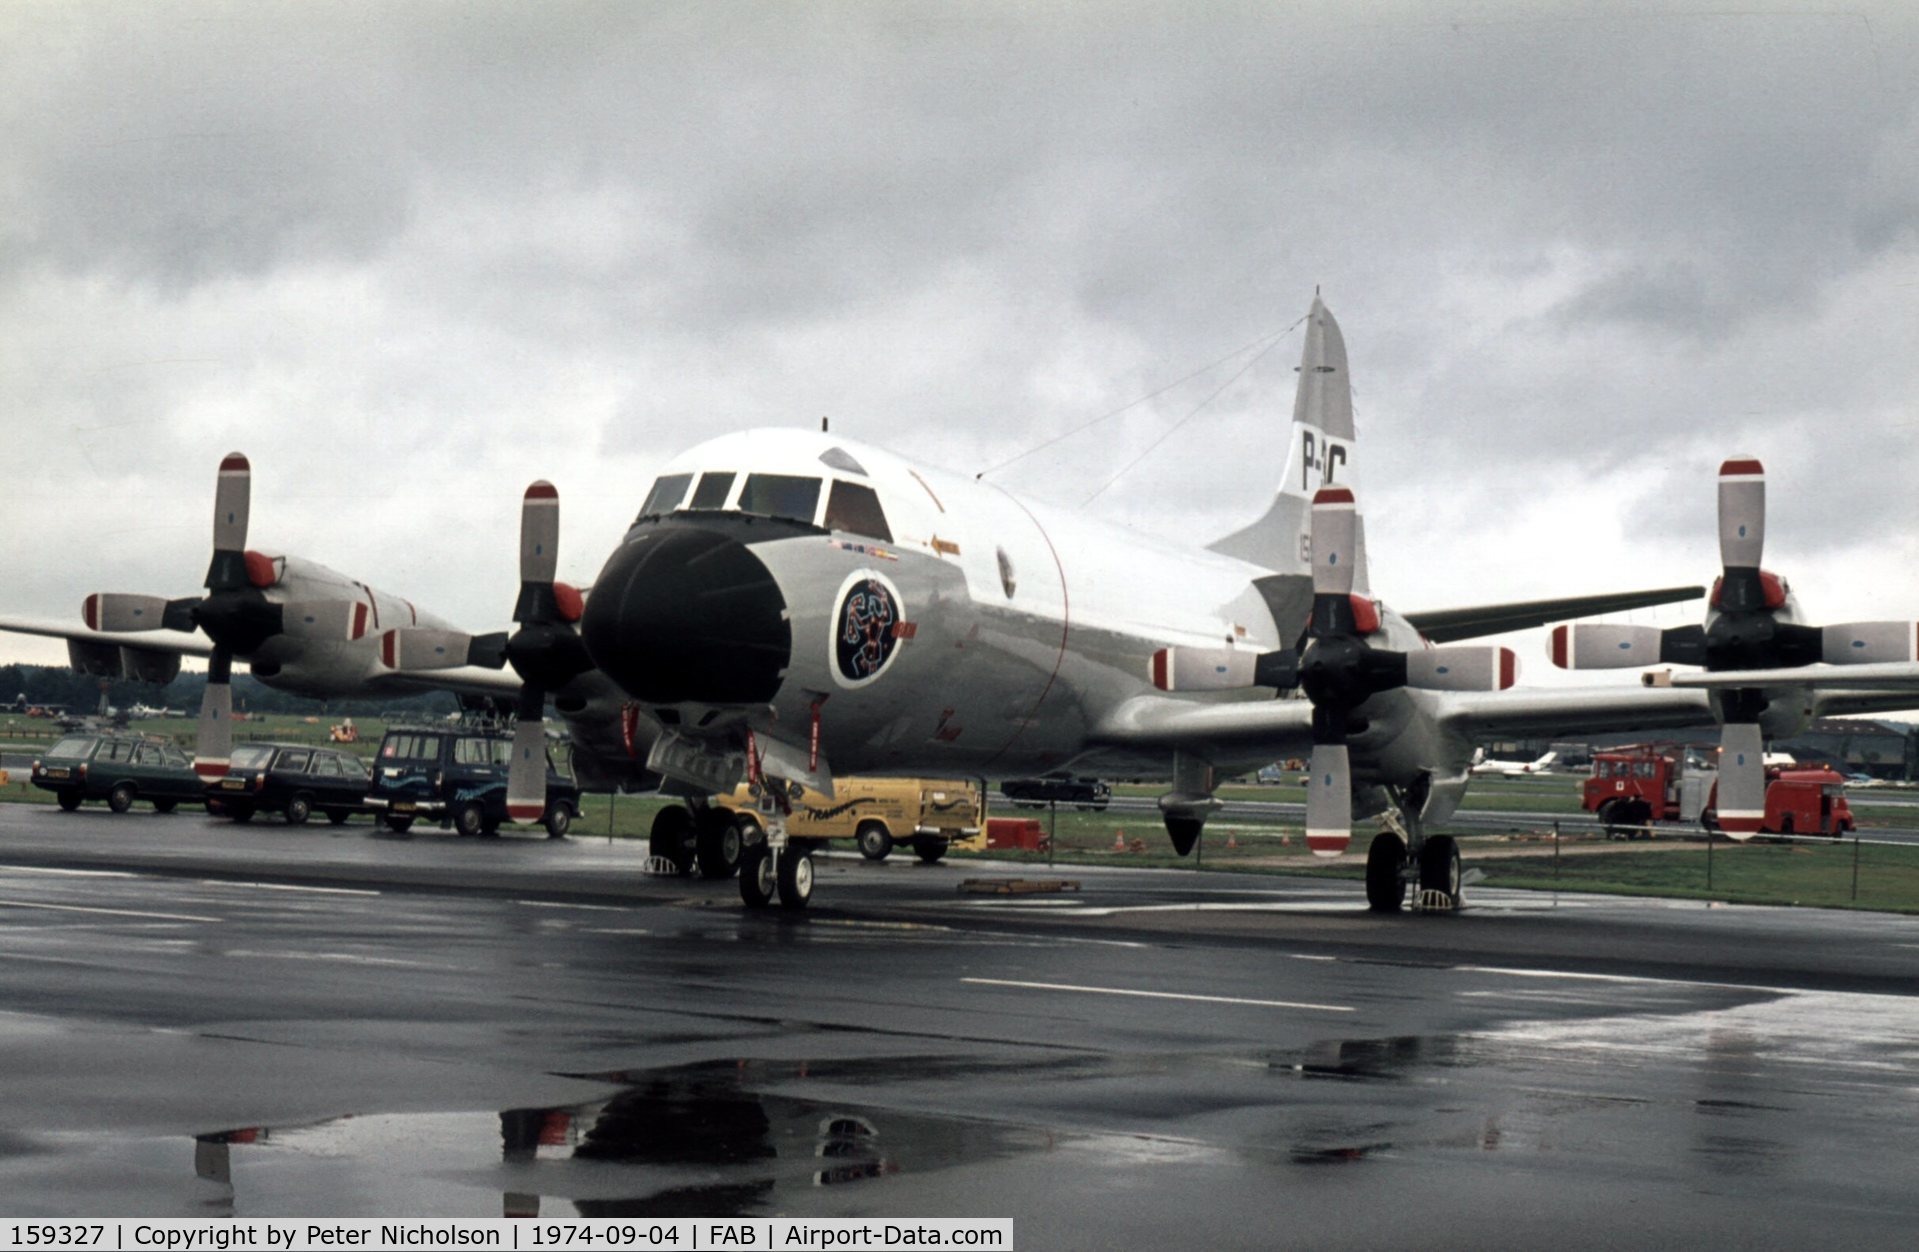 159327, 1974 Lockheed P-3C Orion C/N 285A-5617, P-3C Orion on display at the 1974 Farnborough Airshow.